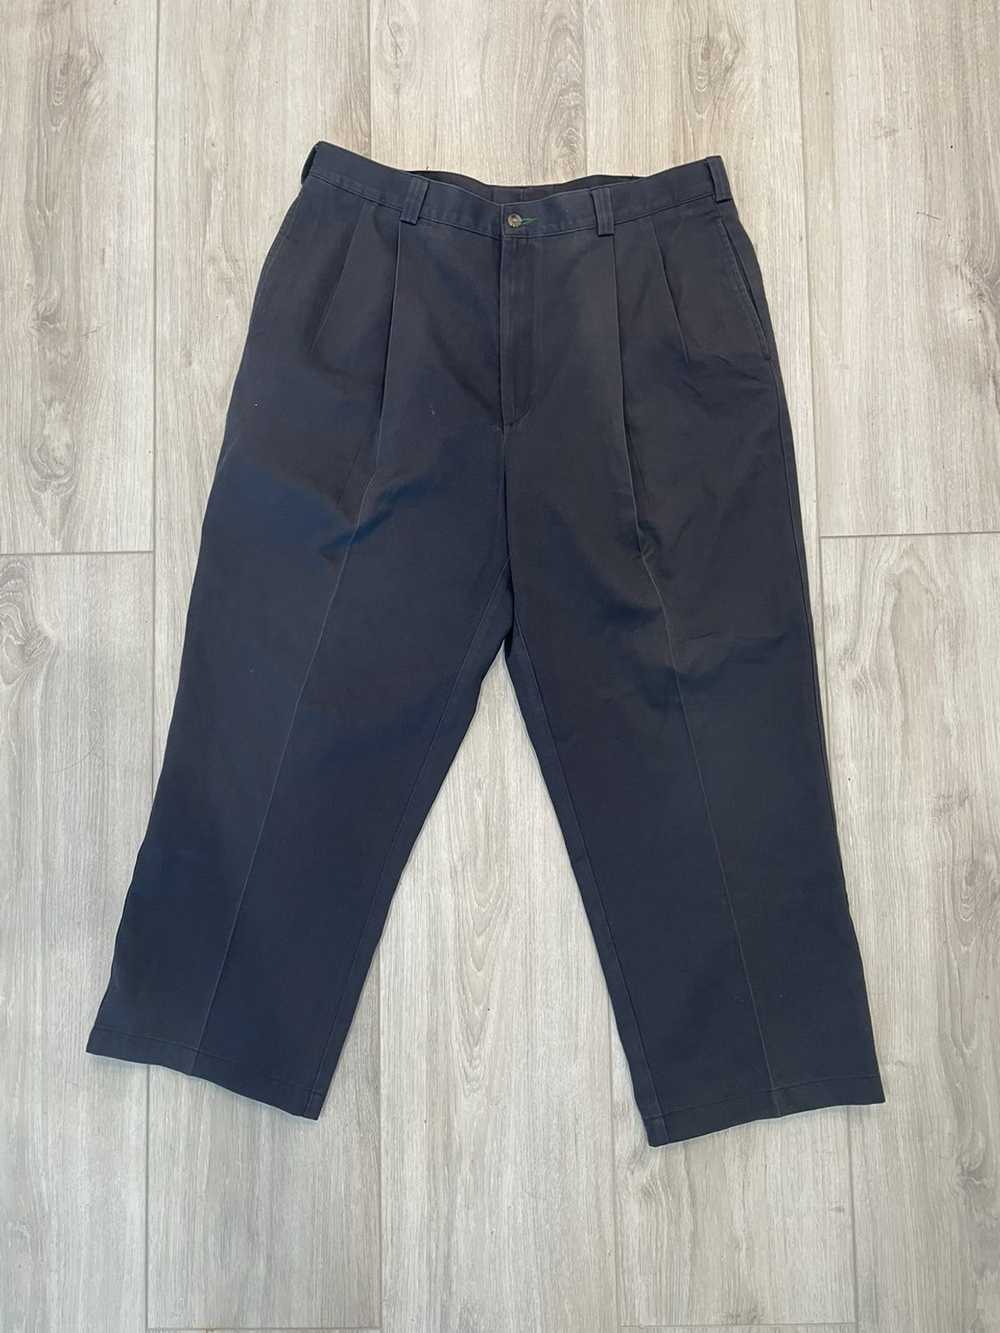 Tommy Hilfiger Tommy Hilfiger Trousers Navy - image 2